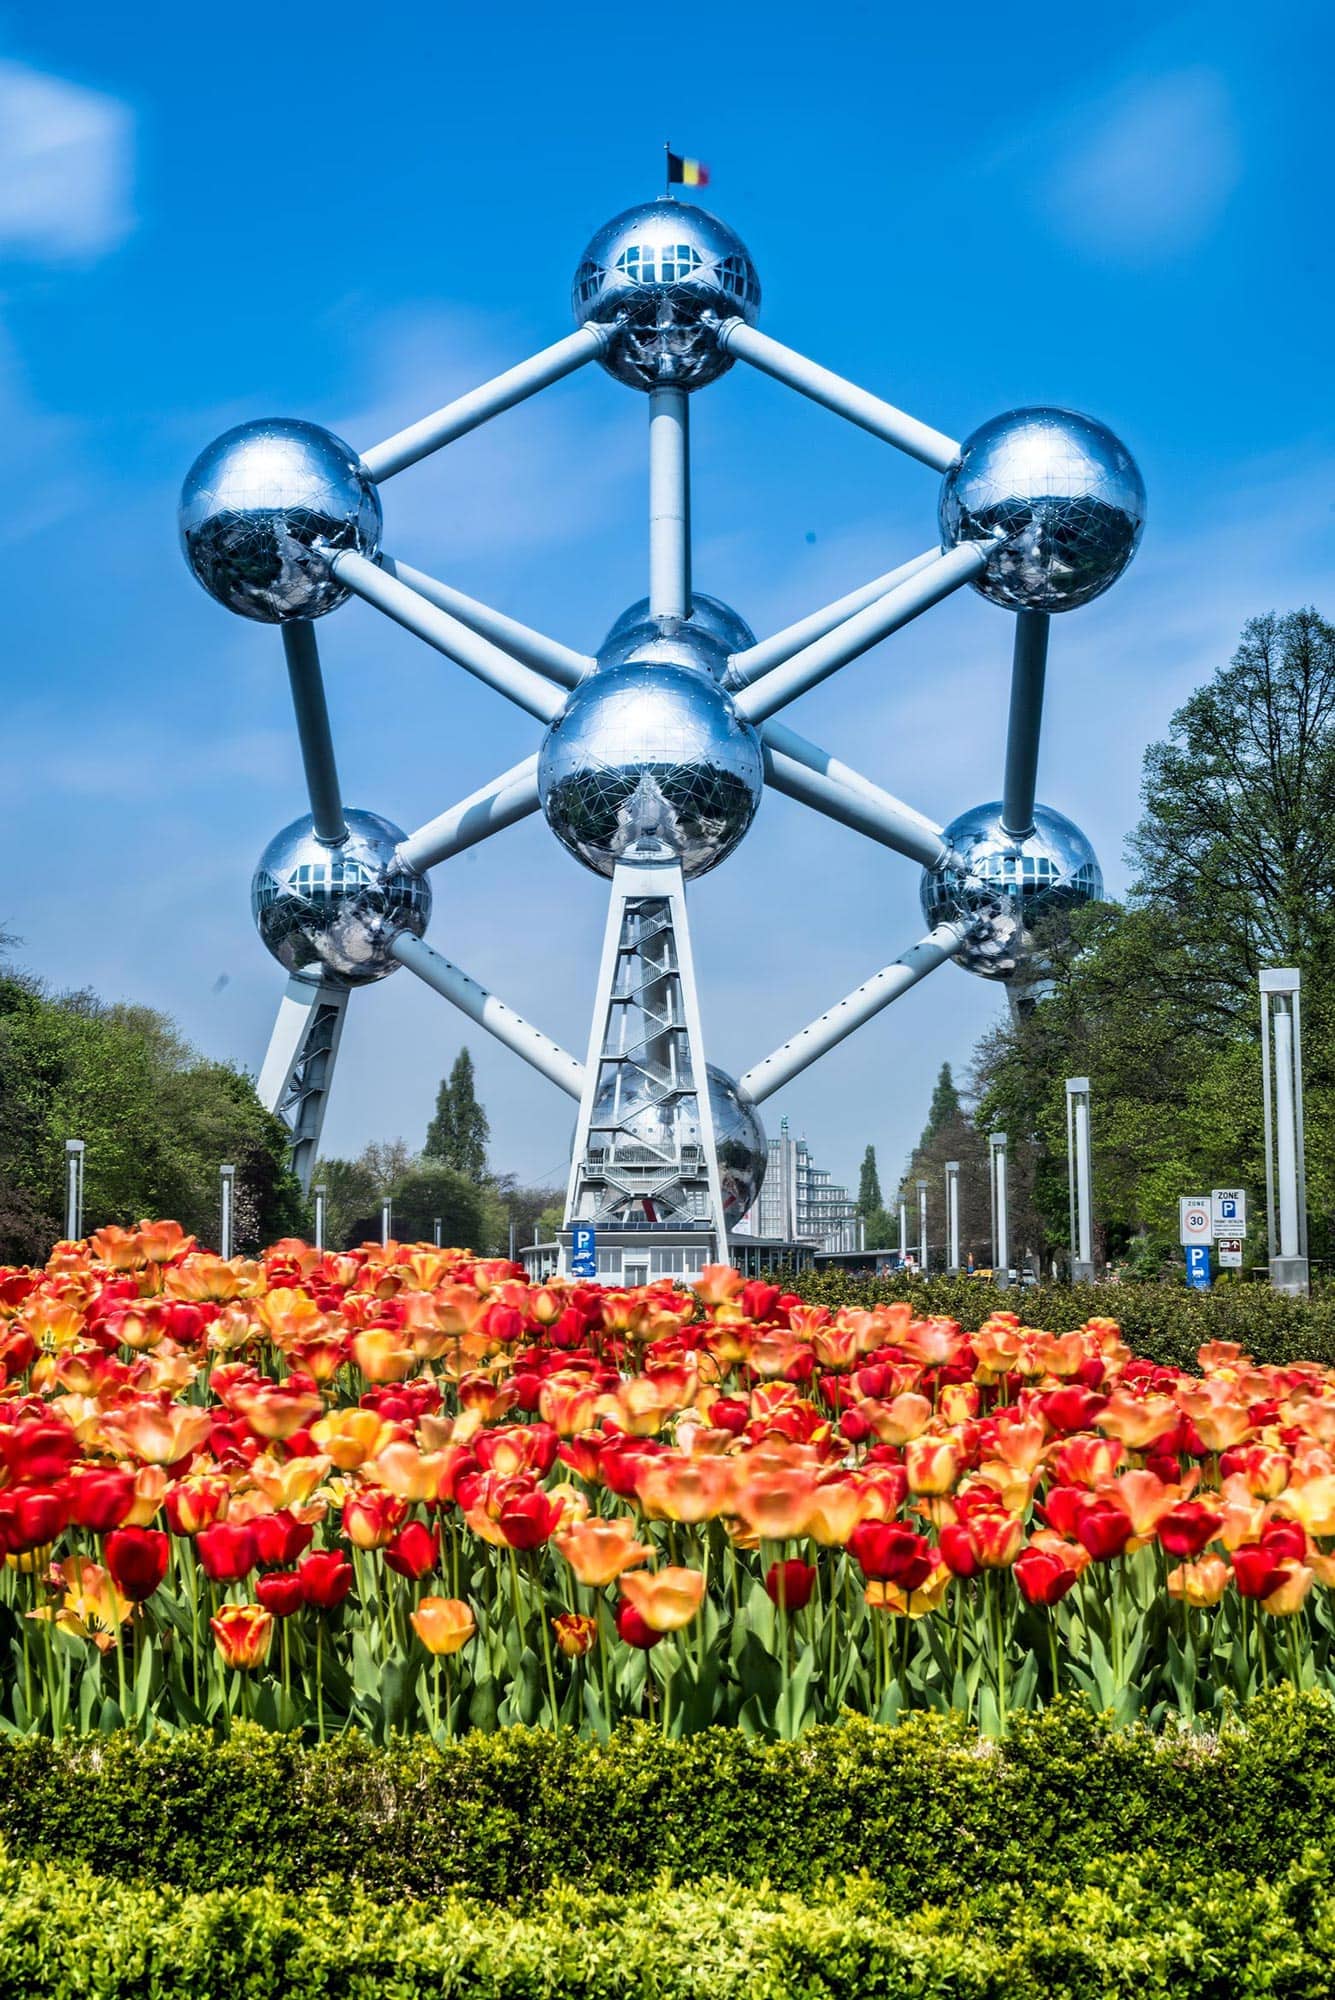 A group of tulips in front of the eu tower in brussels, belgium.